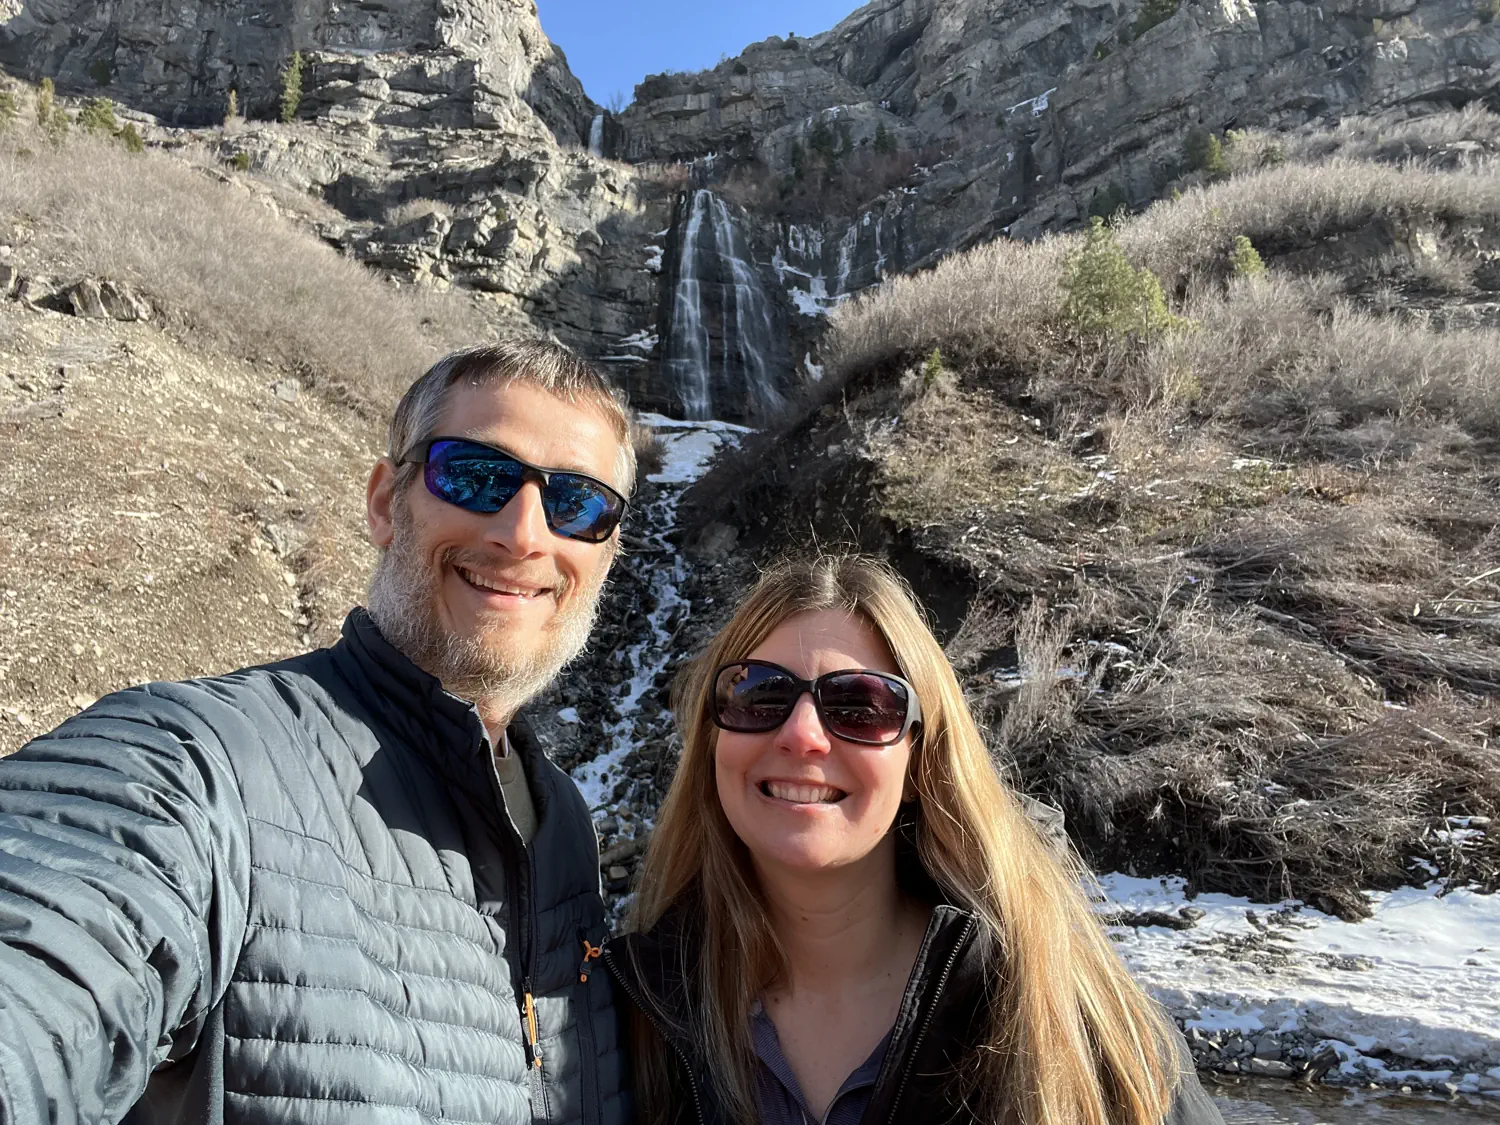 Keith and Lindsey are taking a selfie in front of Bridal Veil Falls in Provo, UT